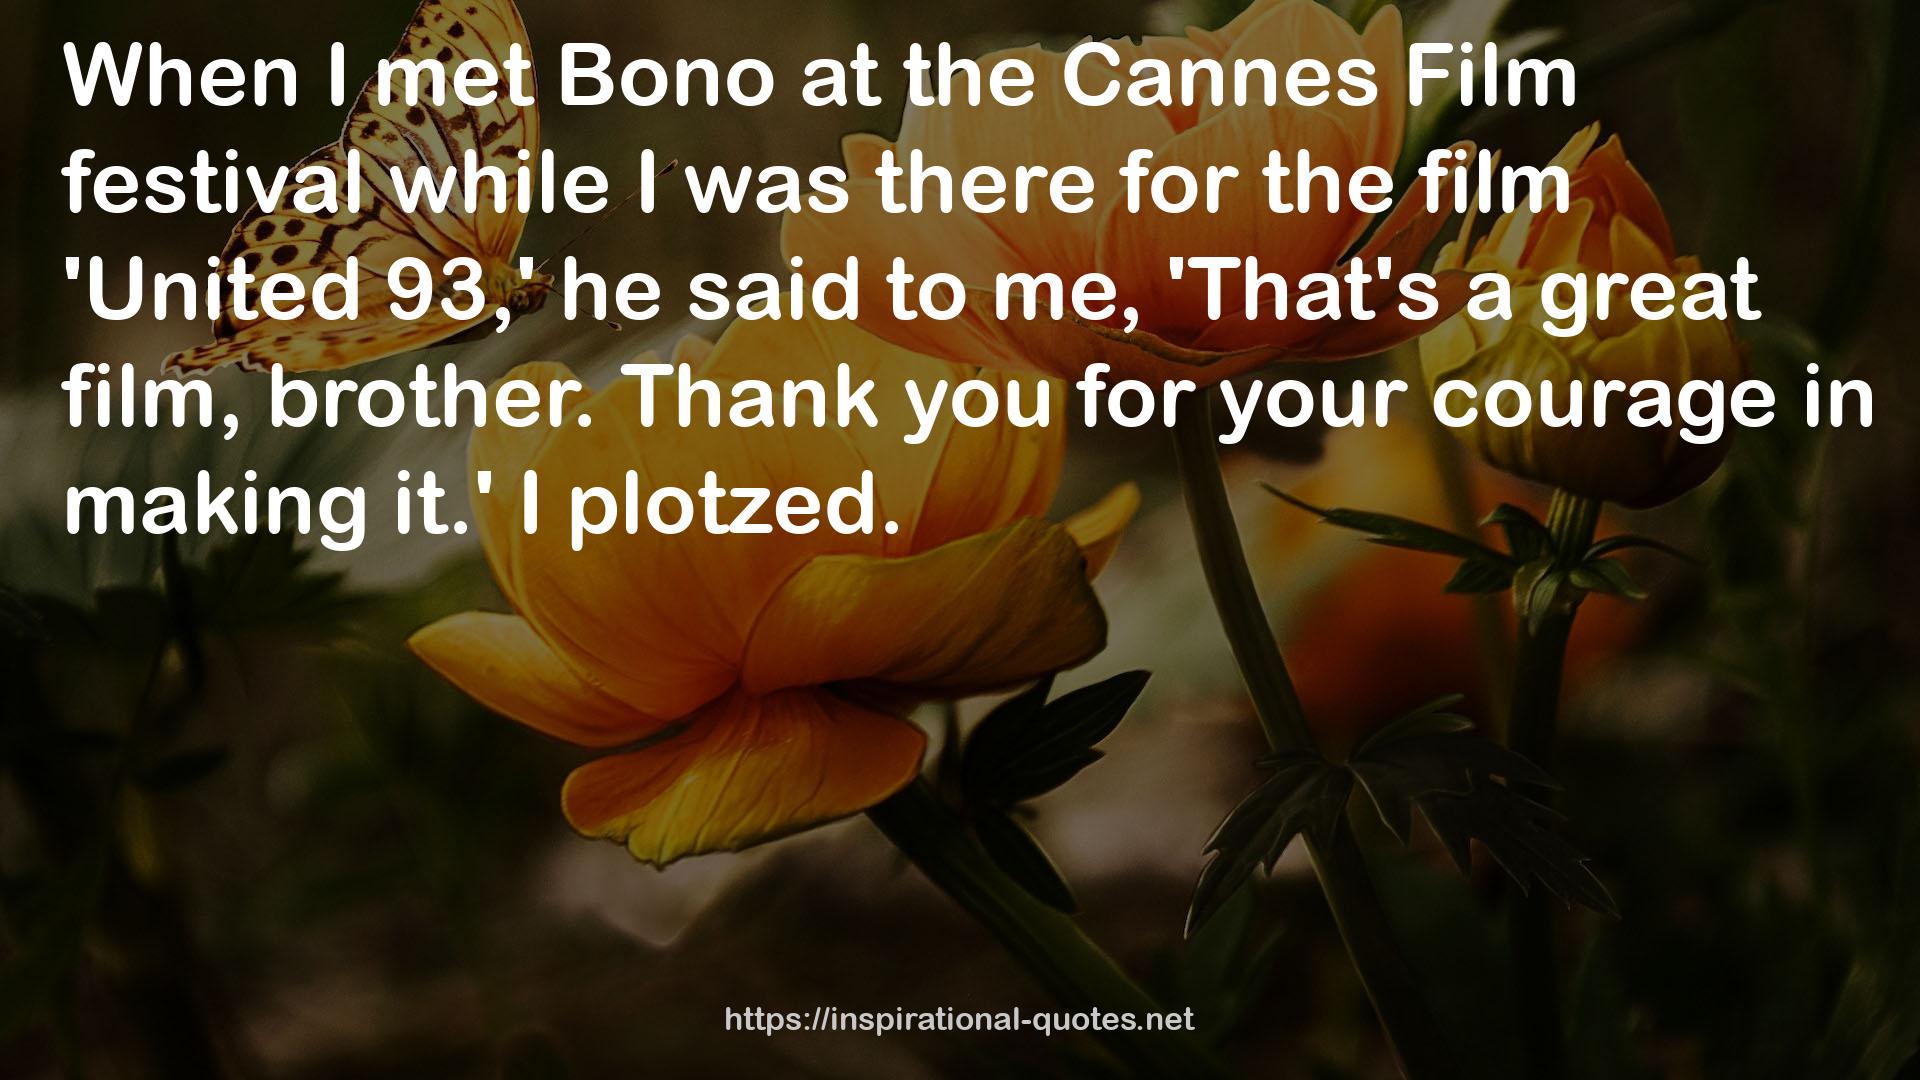 the Cannes Film Festival  QUOTES